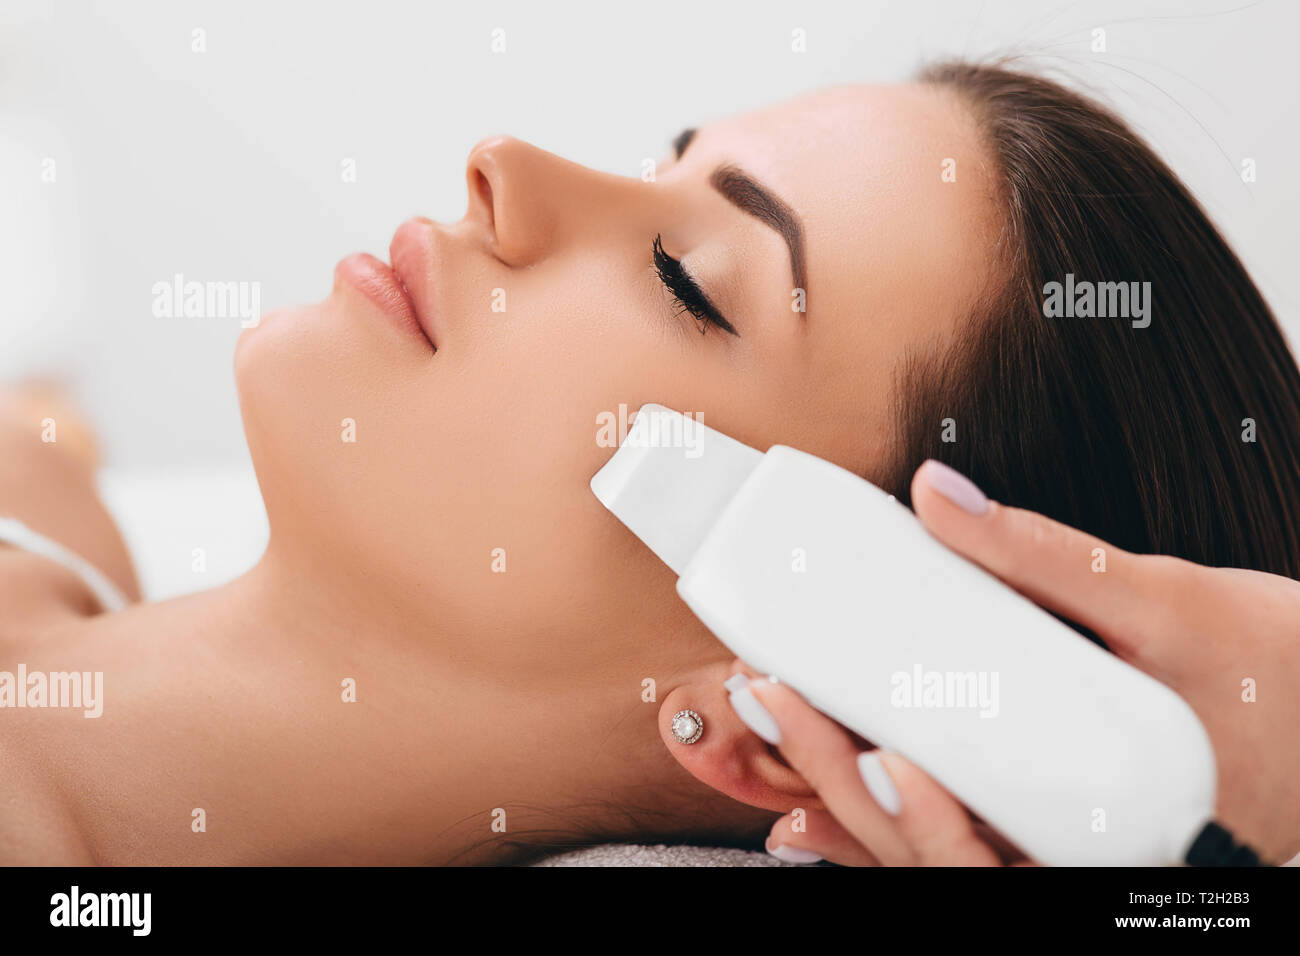 Beautiful woman receiving ultrasonic facial exfoliation at spa. Procedure clearing clogged pores, ultrasonic treatment for skin rejuvenation Stock Photo